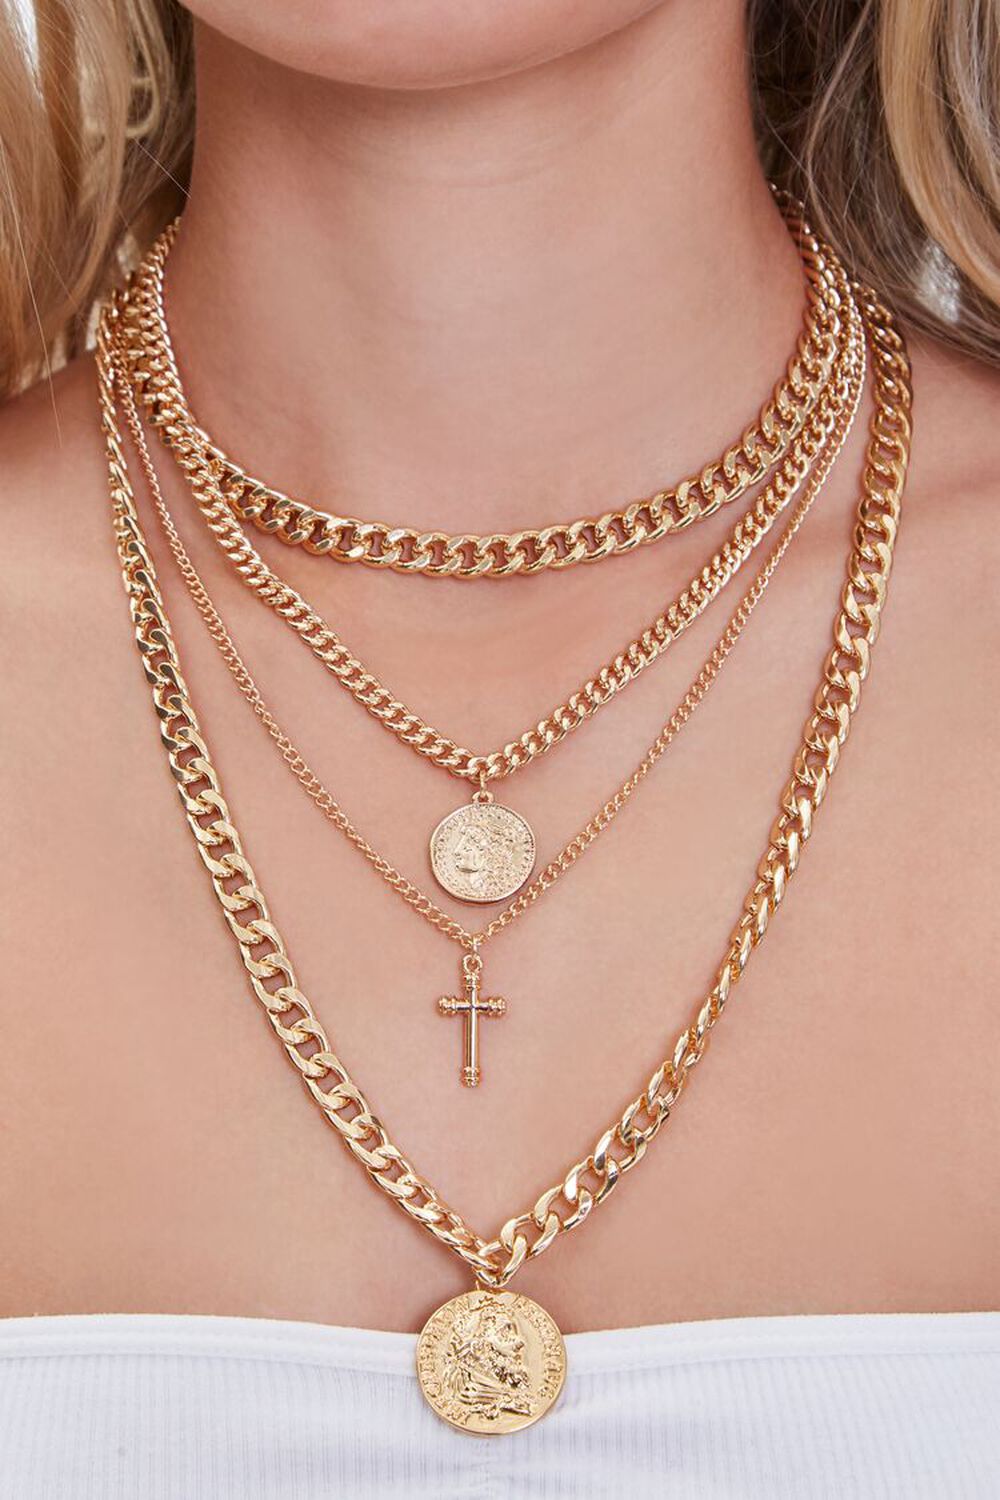 GOLD Ancient Coin & Cross Pendant Layered Necklace, image 1